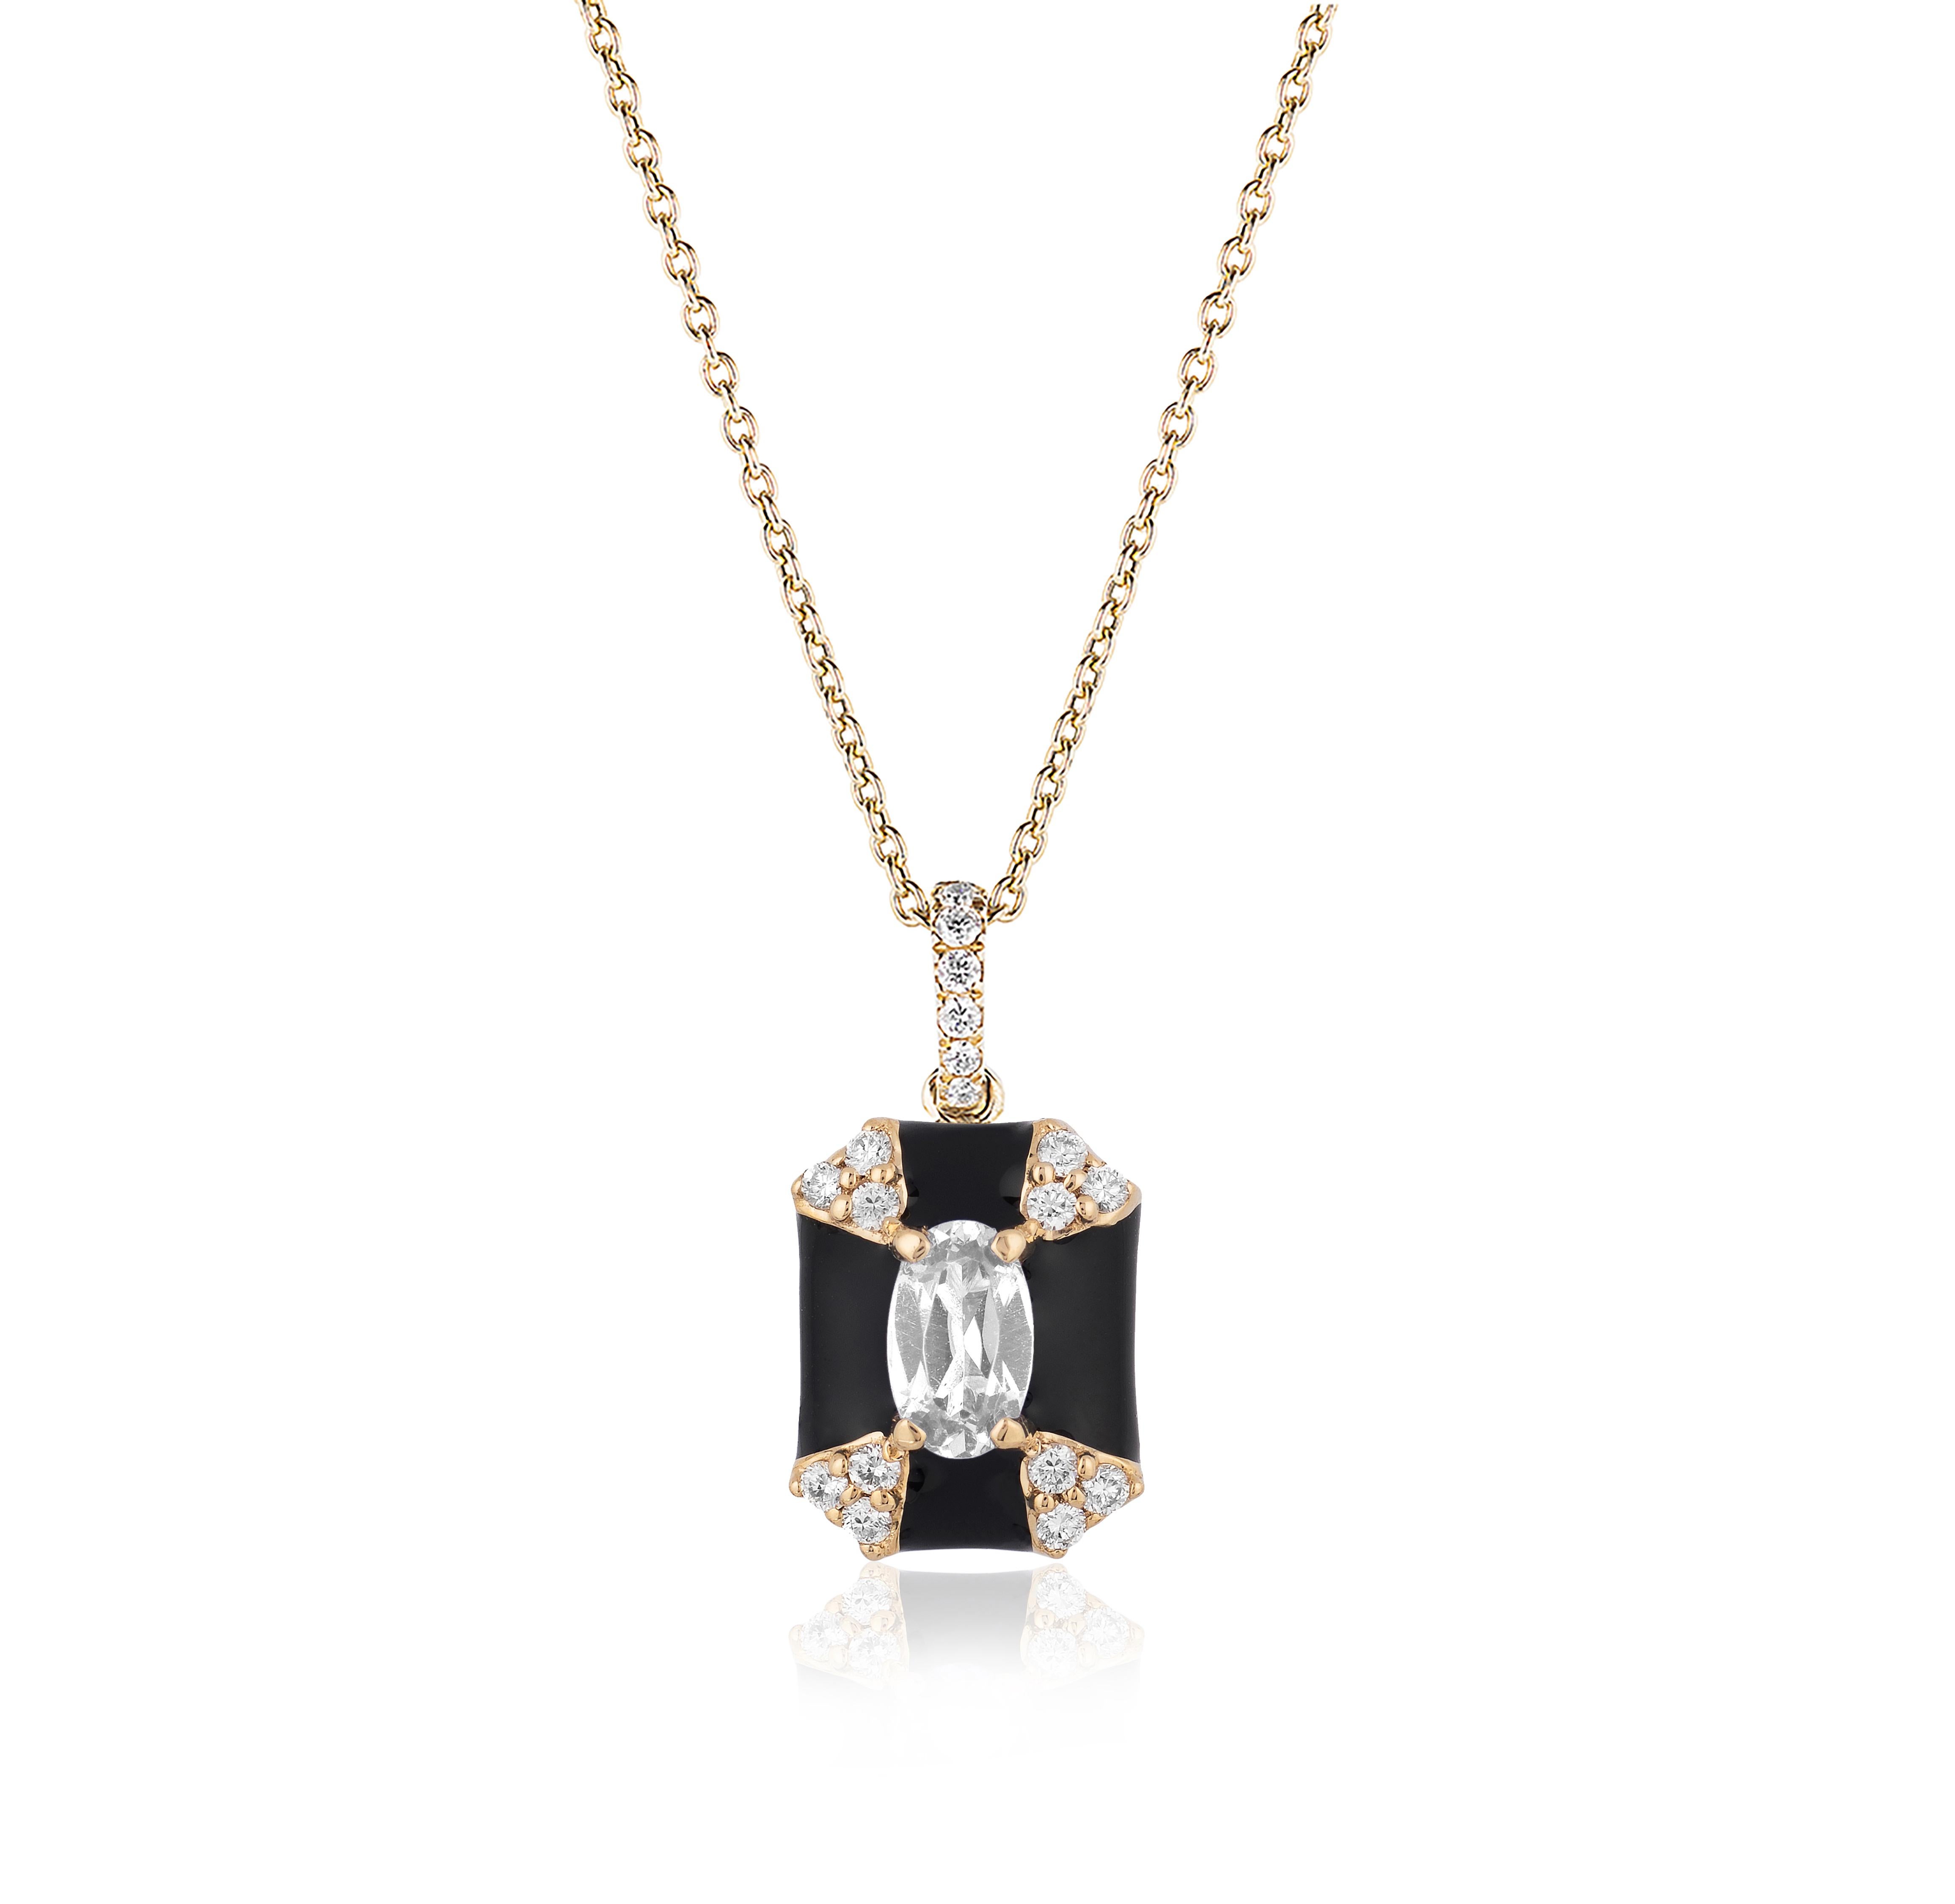 Octagon Black Enamel Pendant with Diamond in 18K Yellow Gold. from 'Queen' Collection

Stone Size: 4 mm